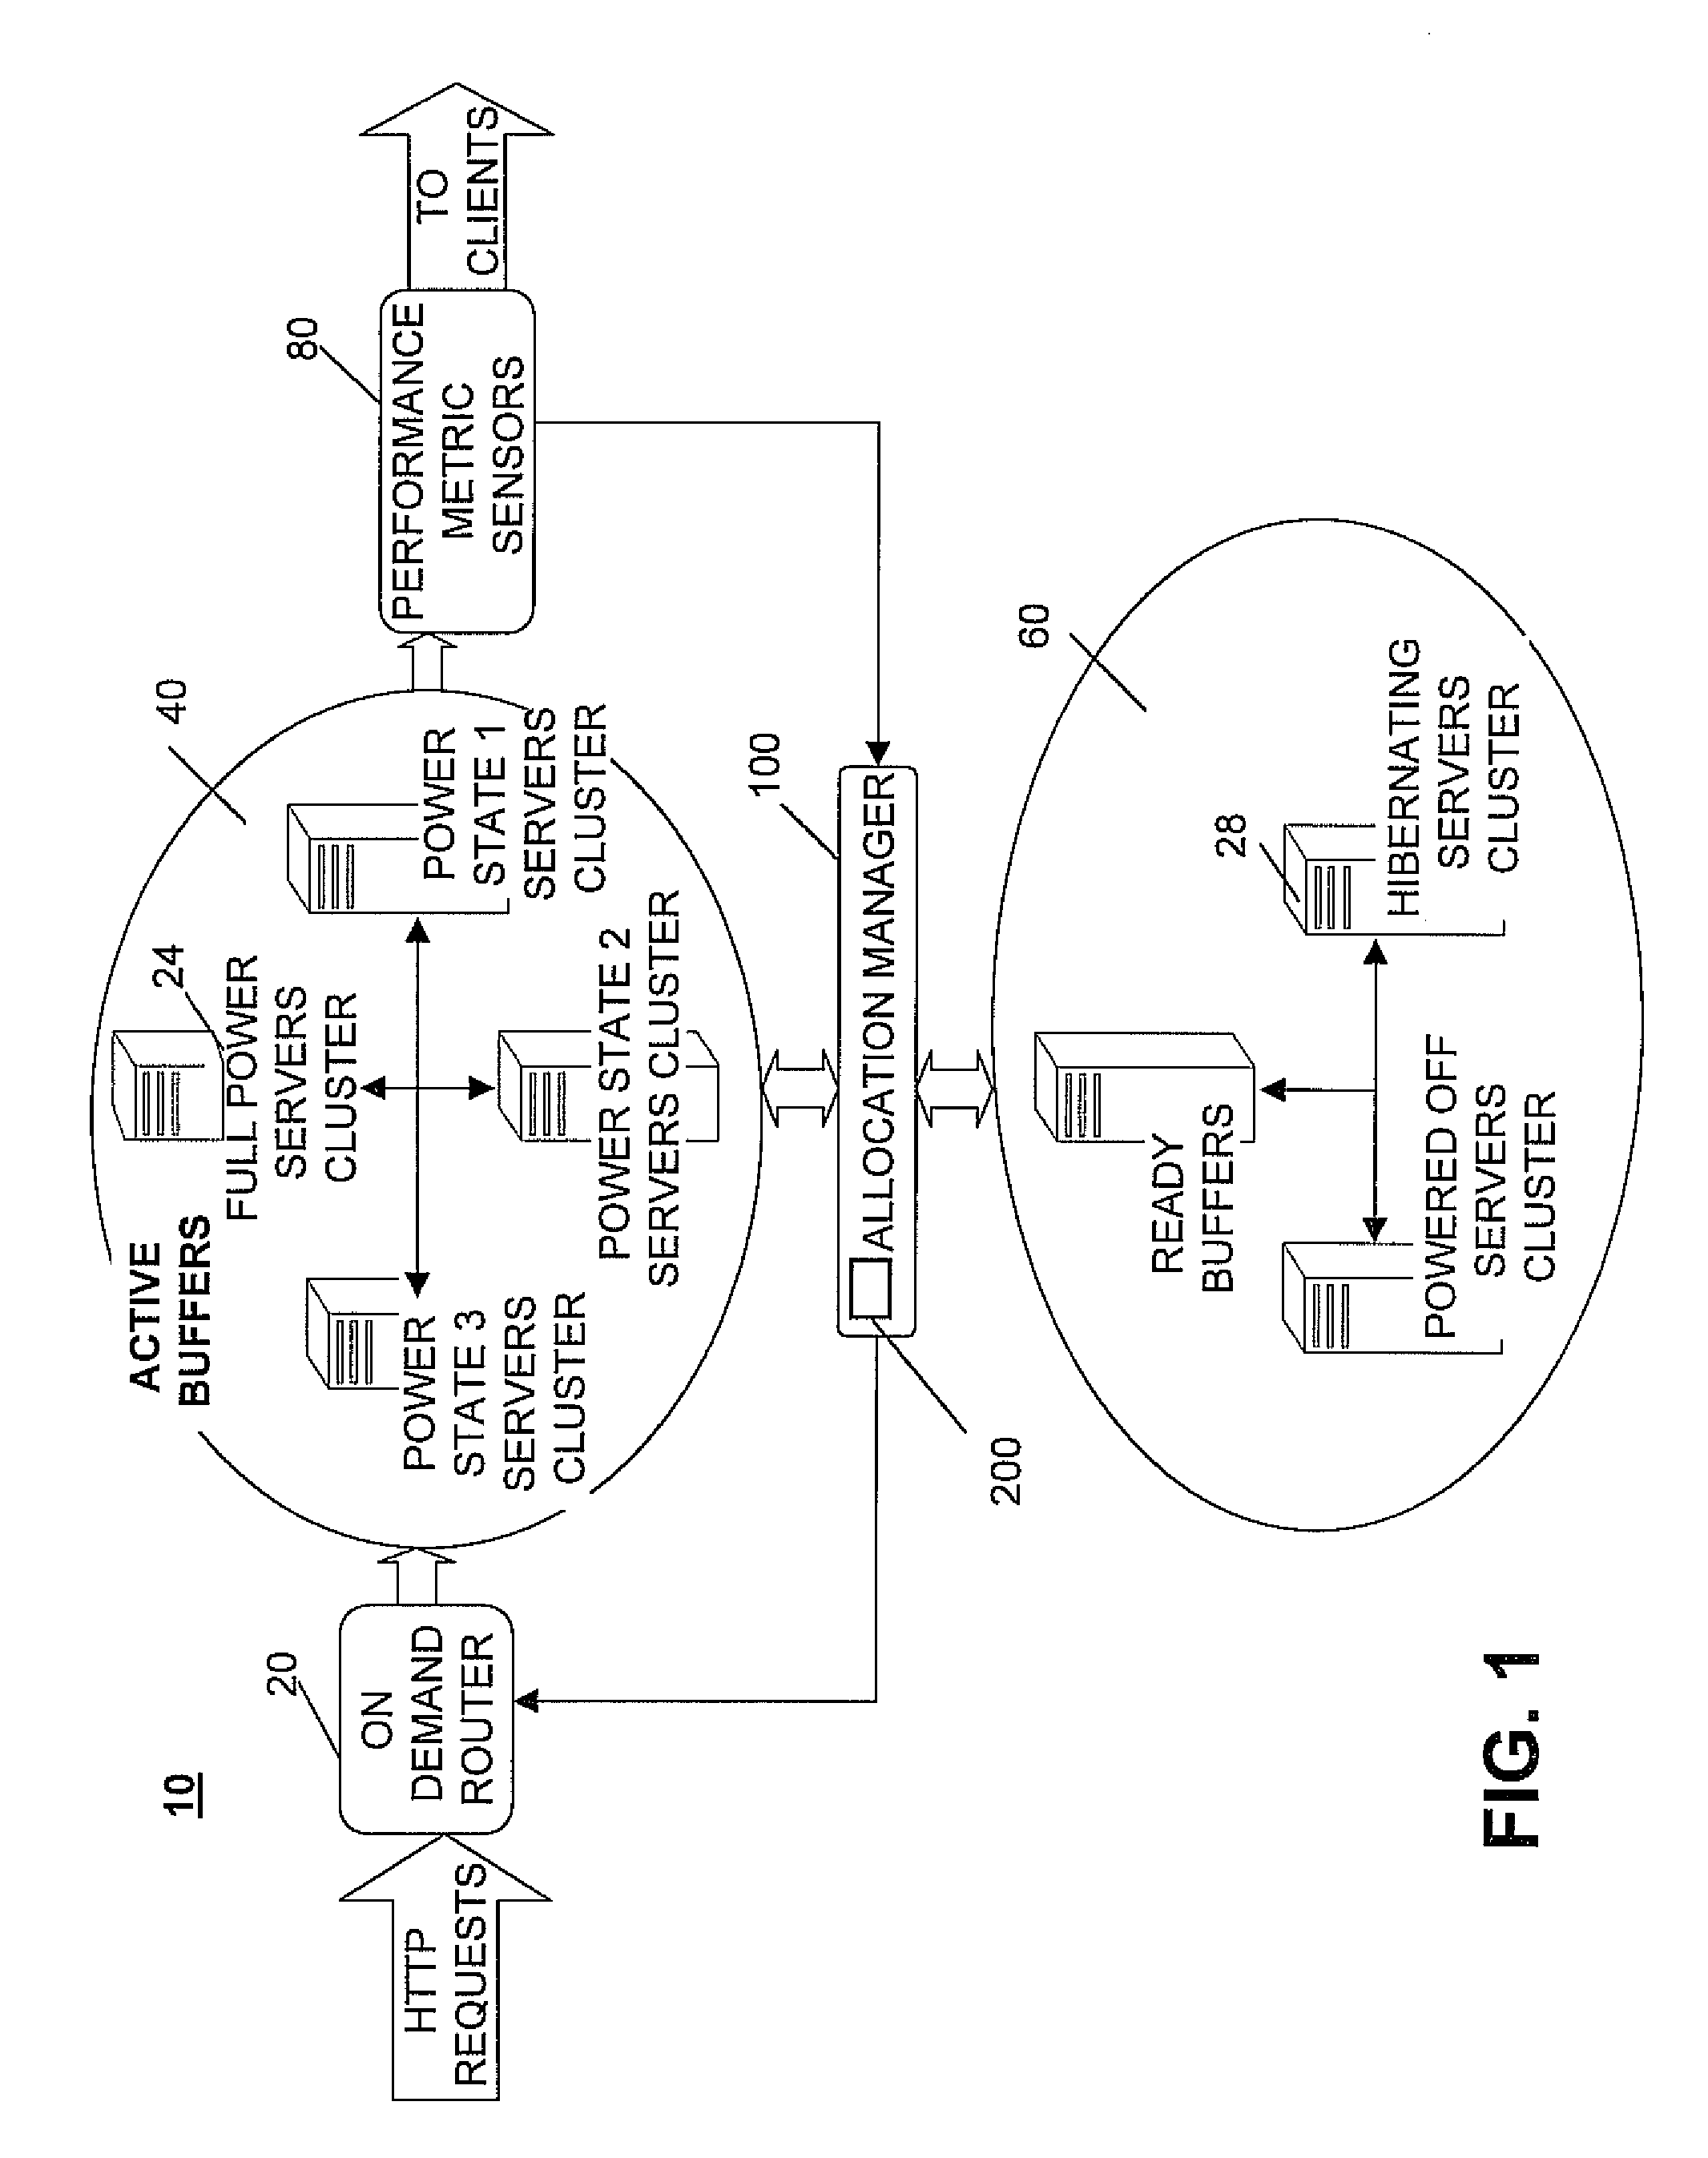 Adaptive dynamic buffering system for power management in server clusters